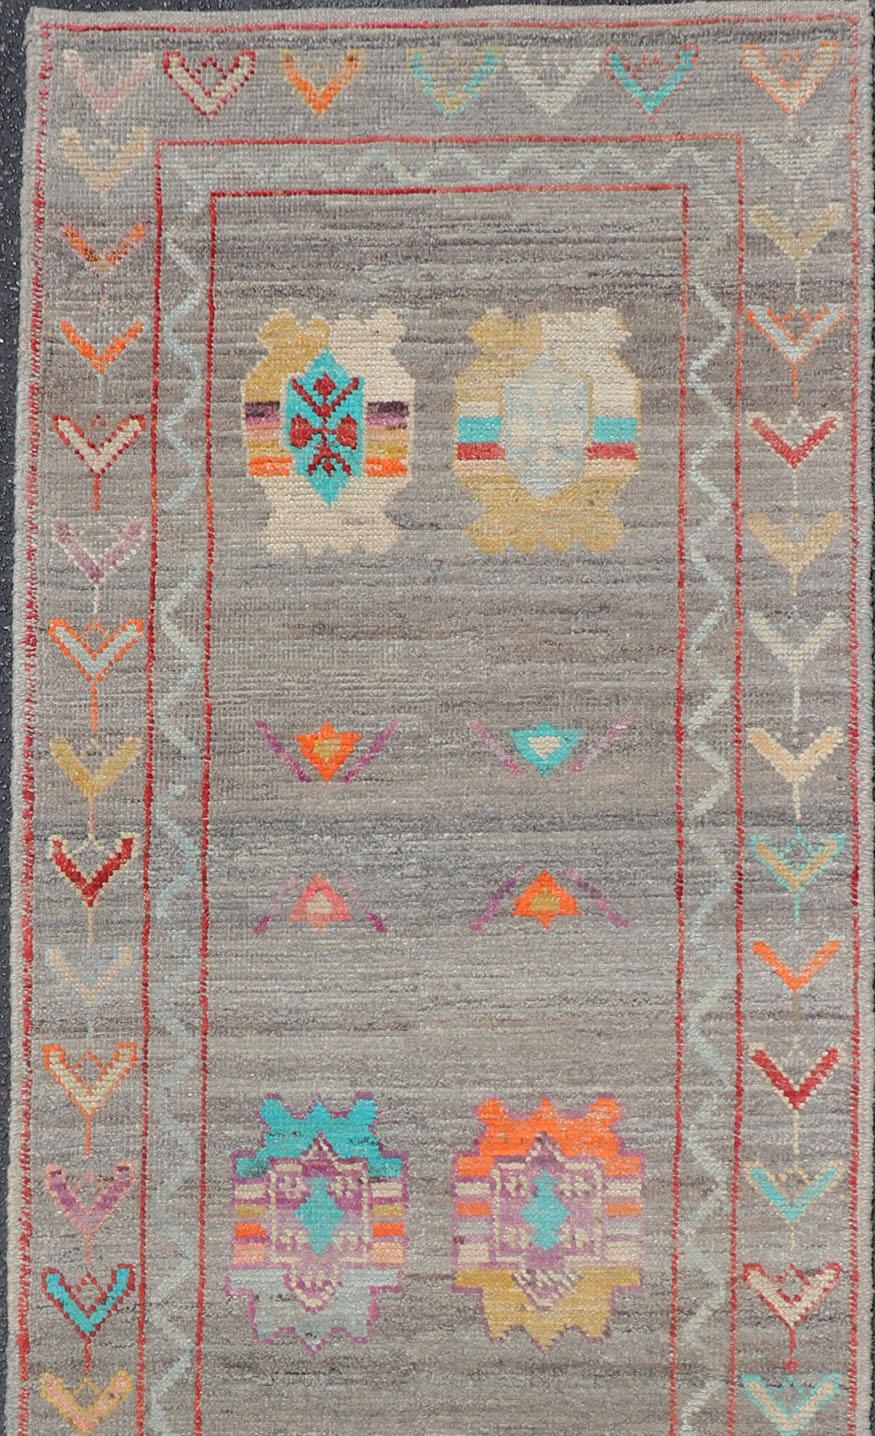 Fine Afghan made, Tribal designed runner in gray and vivid color palette and all-over geometrics Keivan Woven Arts/rug AFG-36122, country of origin / type: Afghanistan / Modern

Measures: 2'8 x 9'7 

This modern rug features a subdued, gray